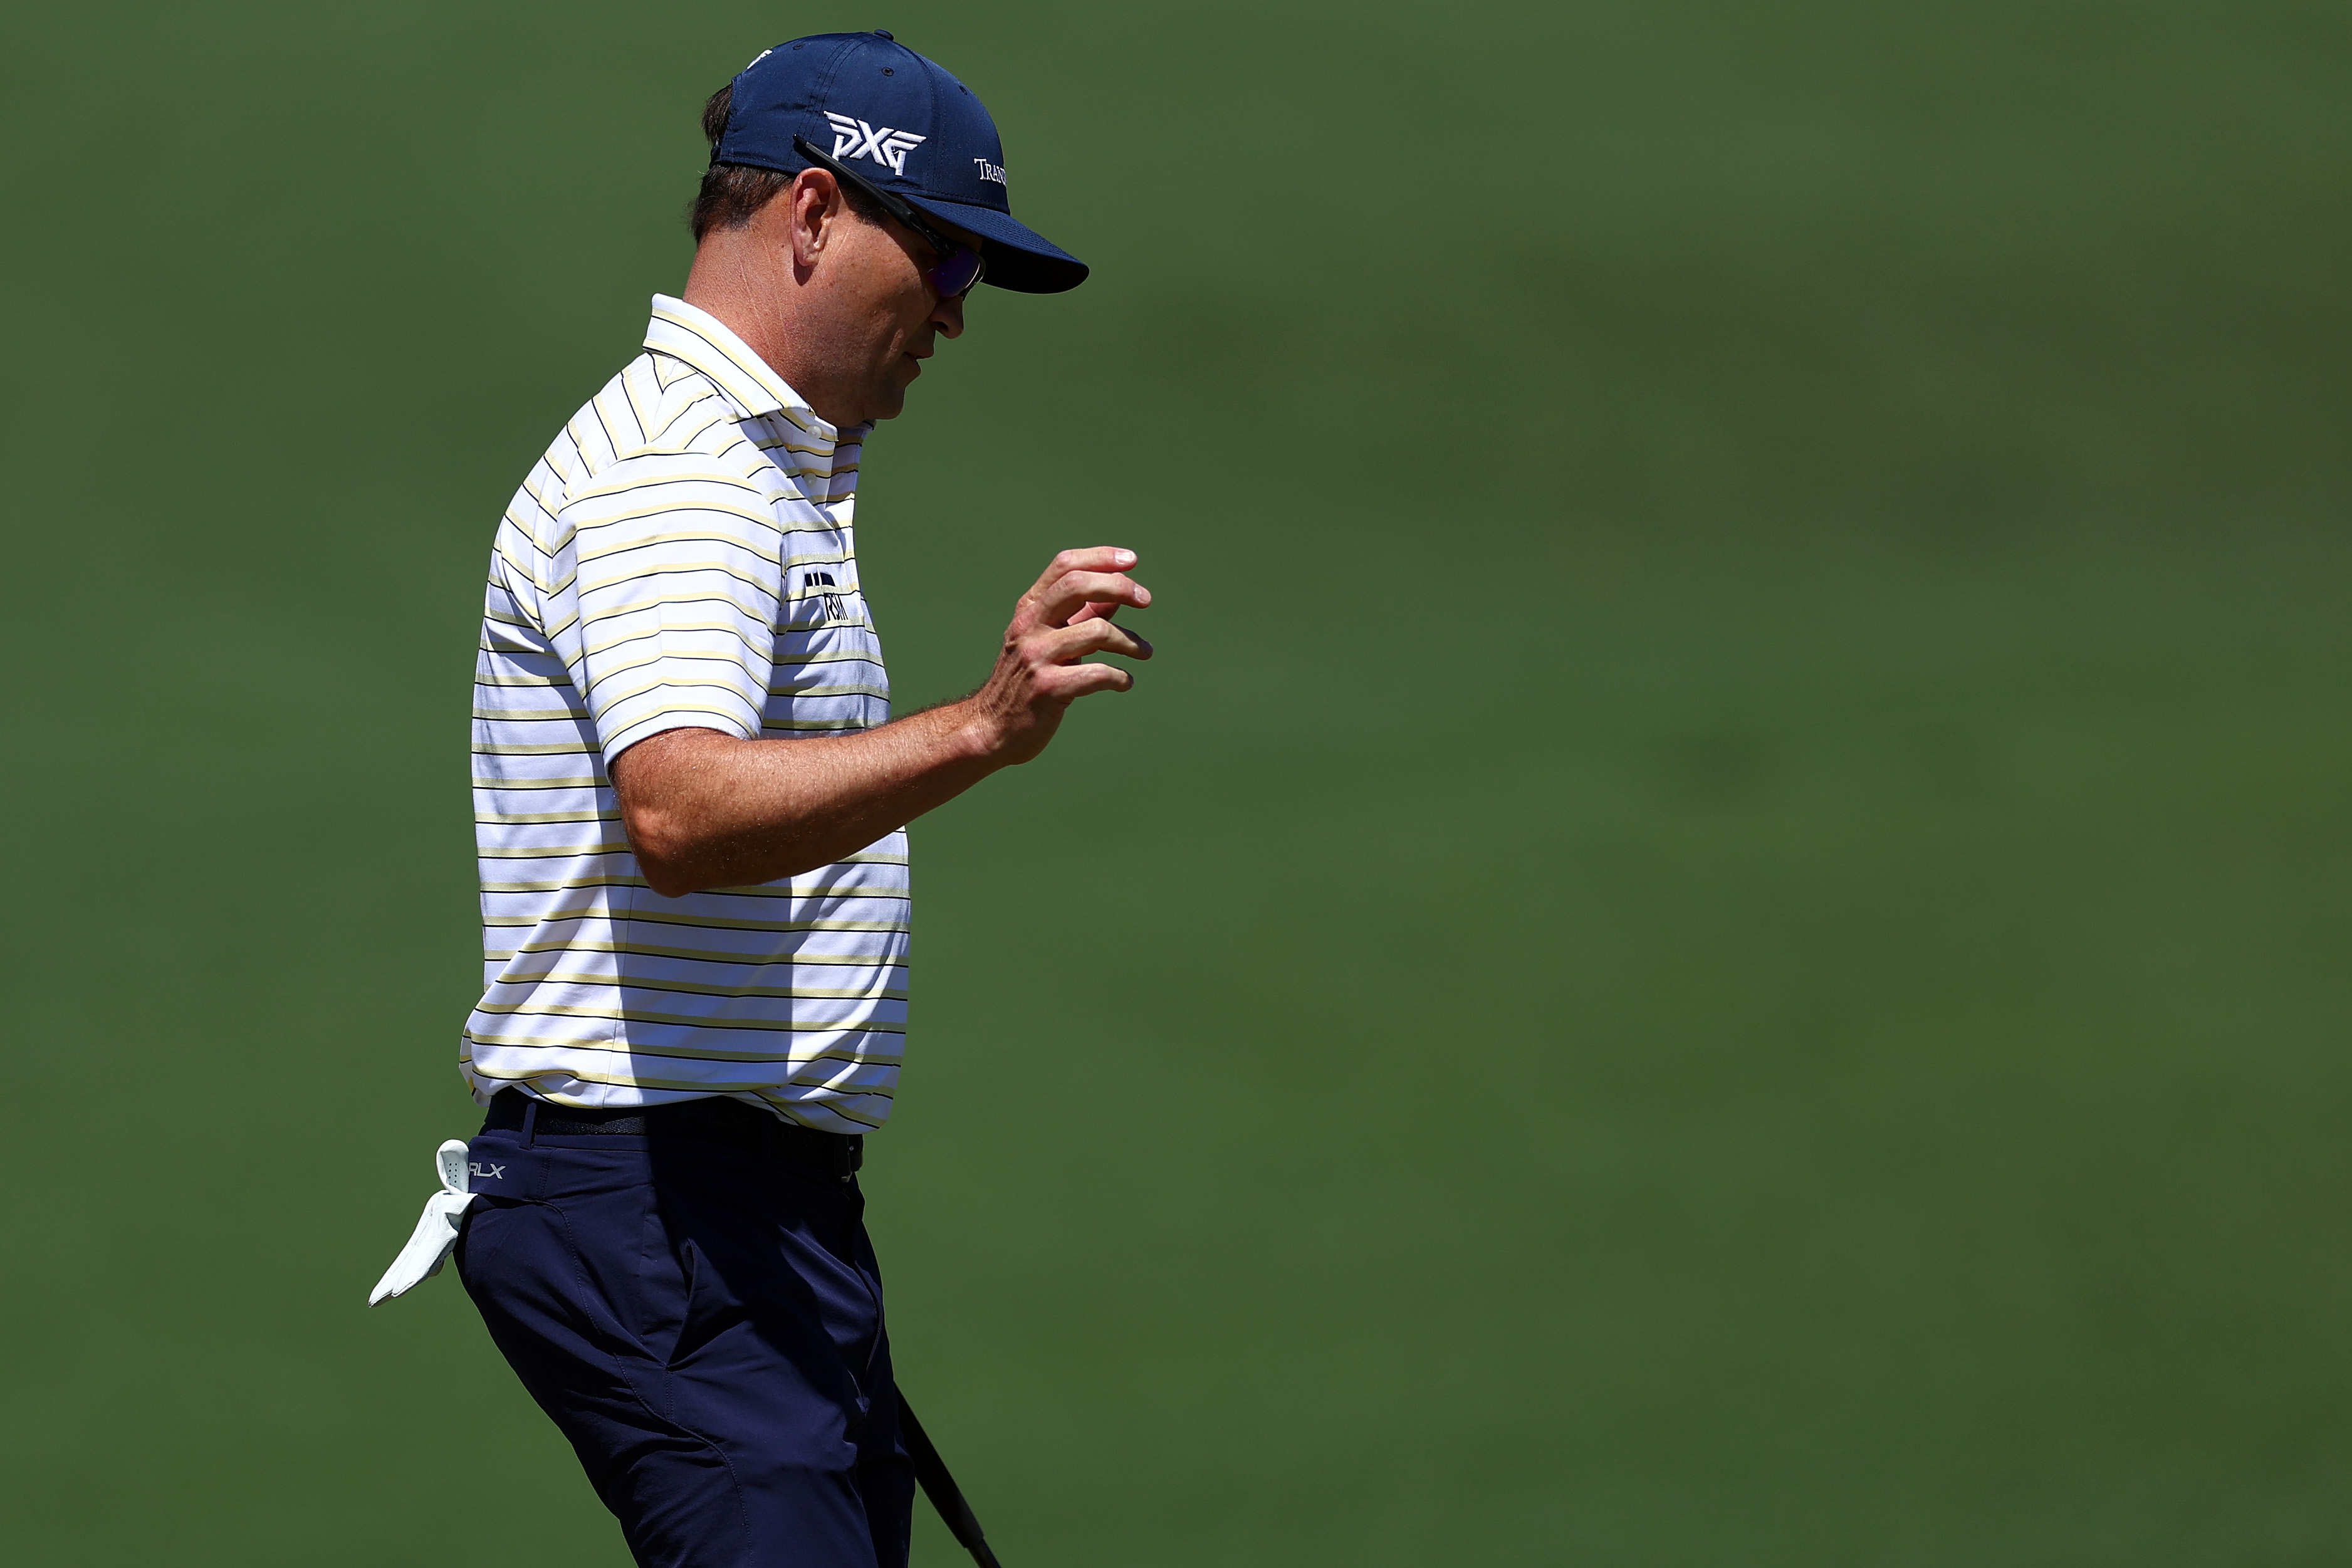 Masters Tournament: Zach Johnson Appears to Tell Fans to 'F*** Off' After Missing Putt